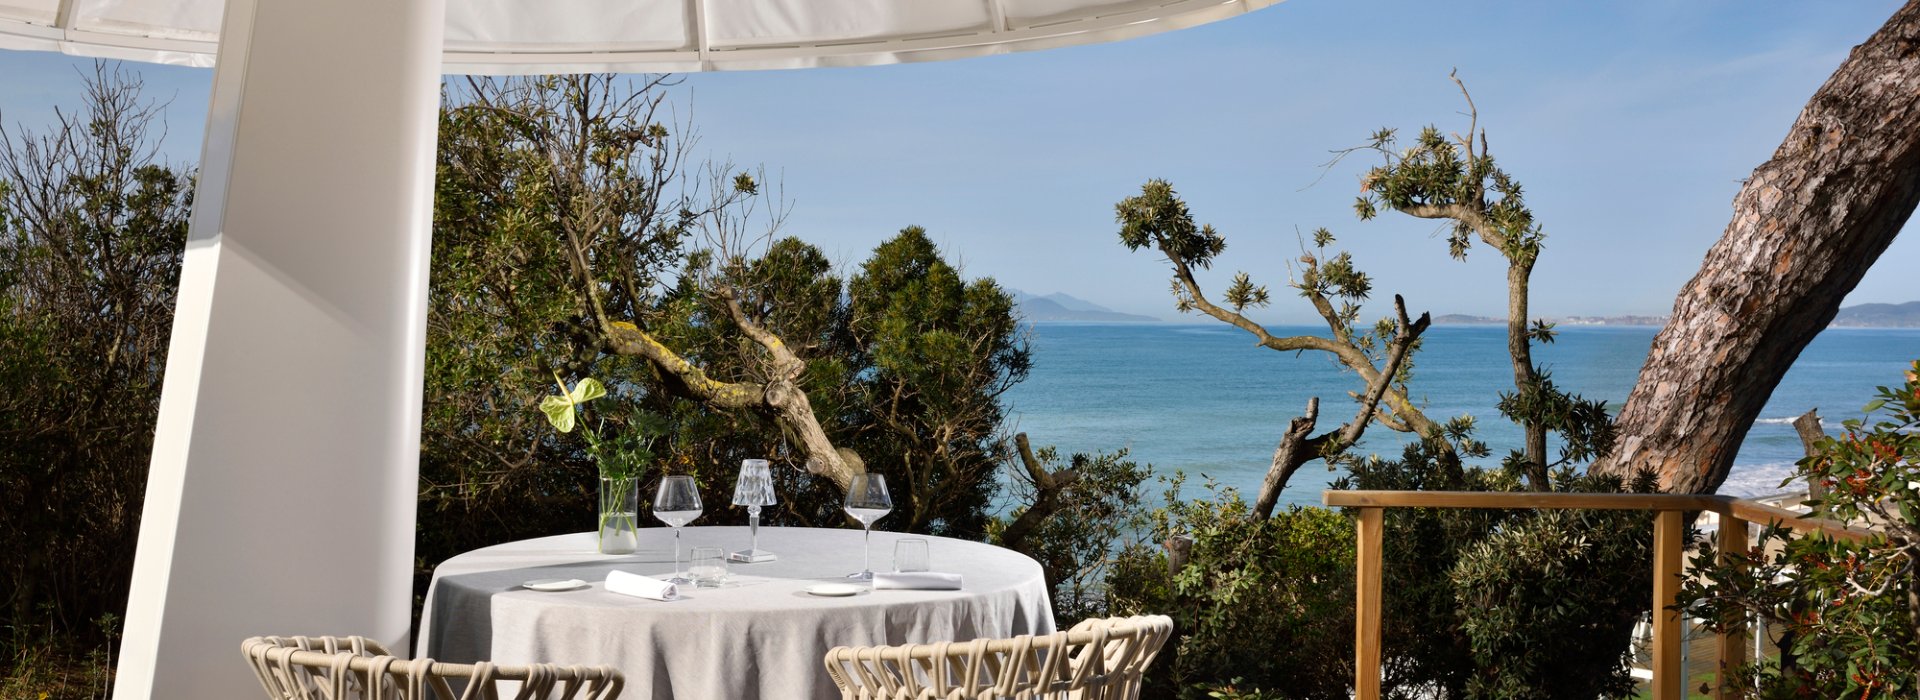 All inclusive resort deal on the Tuscan coast in Follonica, restaurant with sea-view